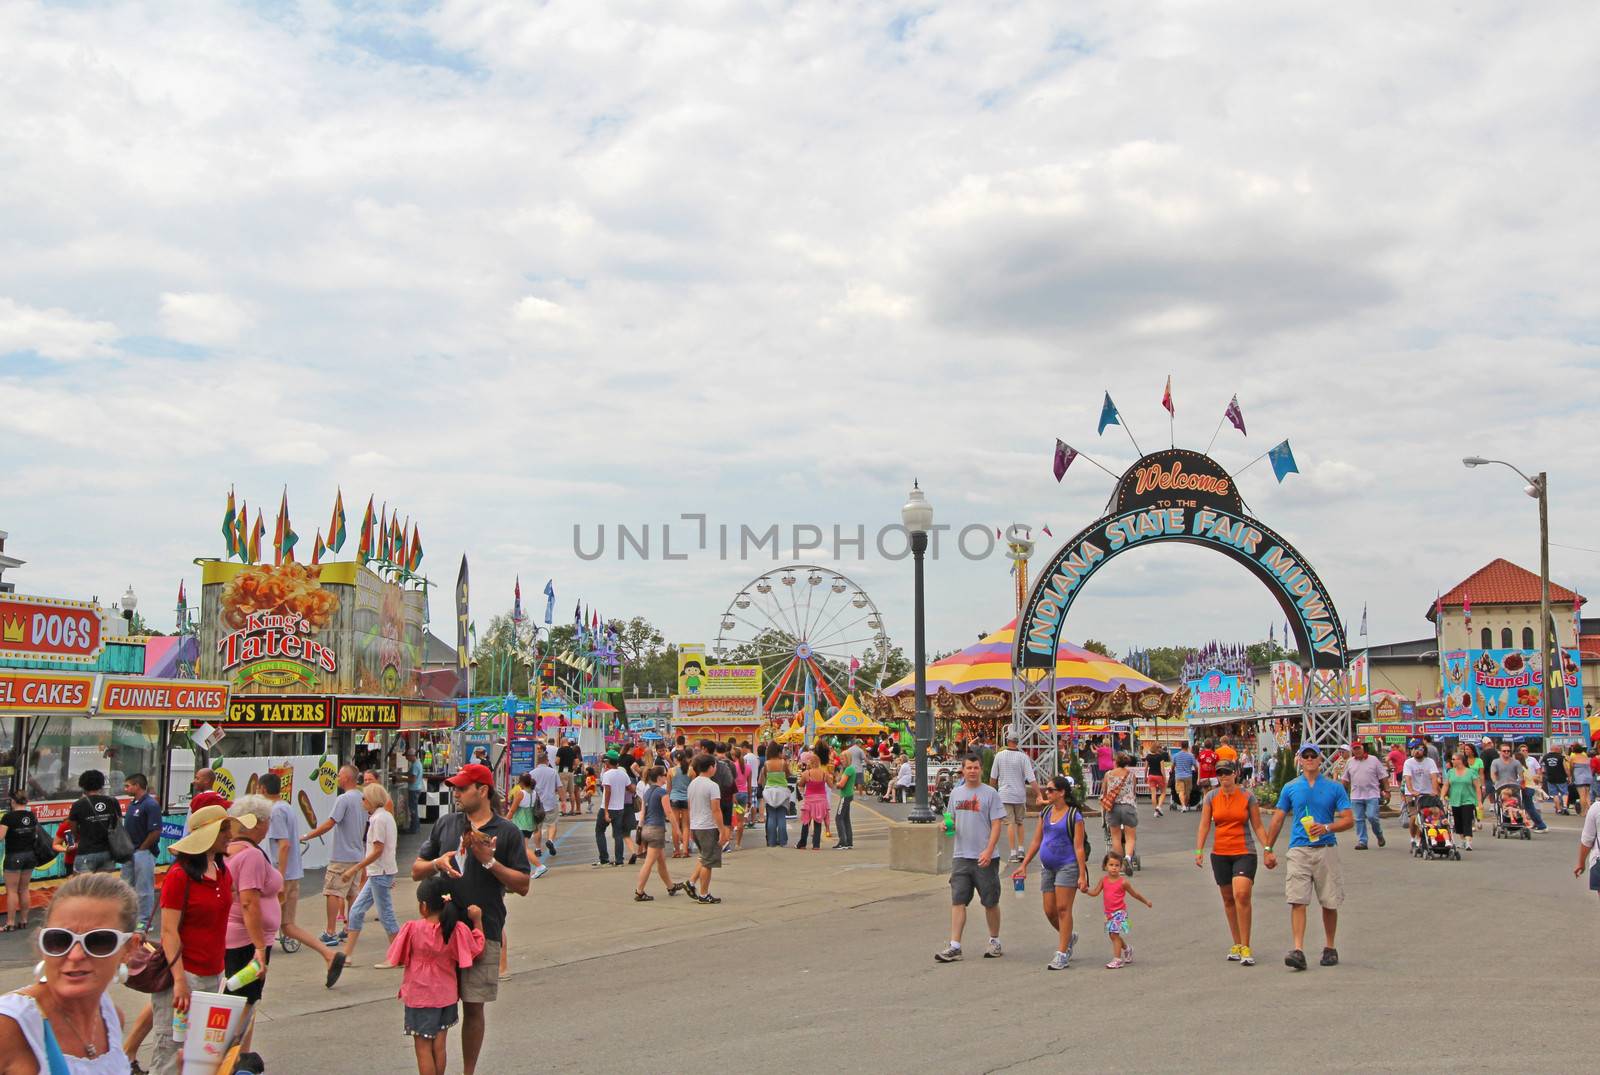 INDIANAPOLIS, INDIANA - AUGUST 12: Fairgoers at the main entrance to the Midway of the Indiana State Fair on August 12, 2012. This very popular fair hosts more than 850,000 people every August.